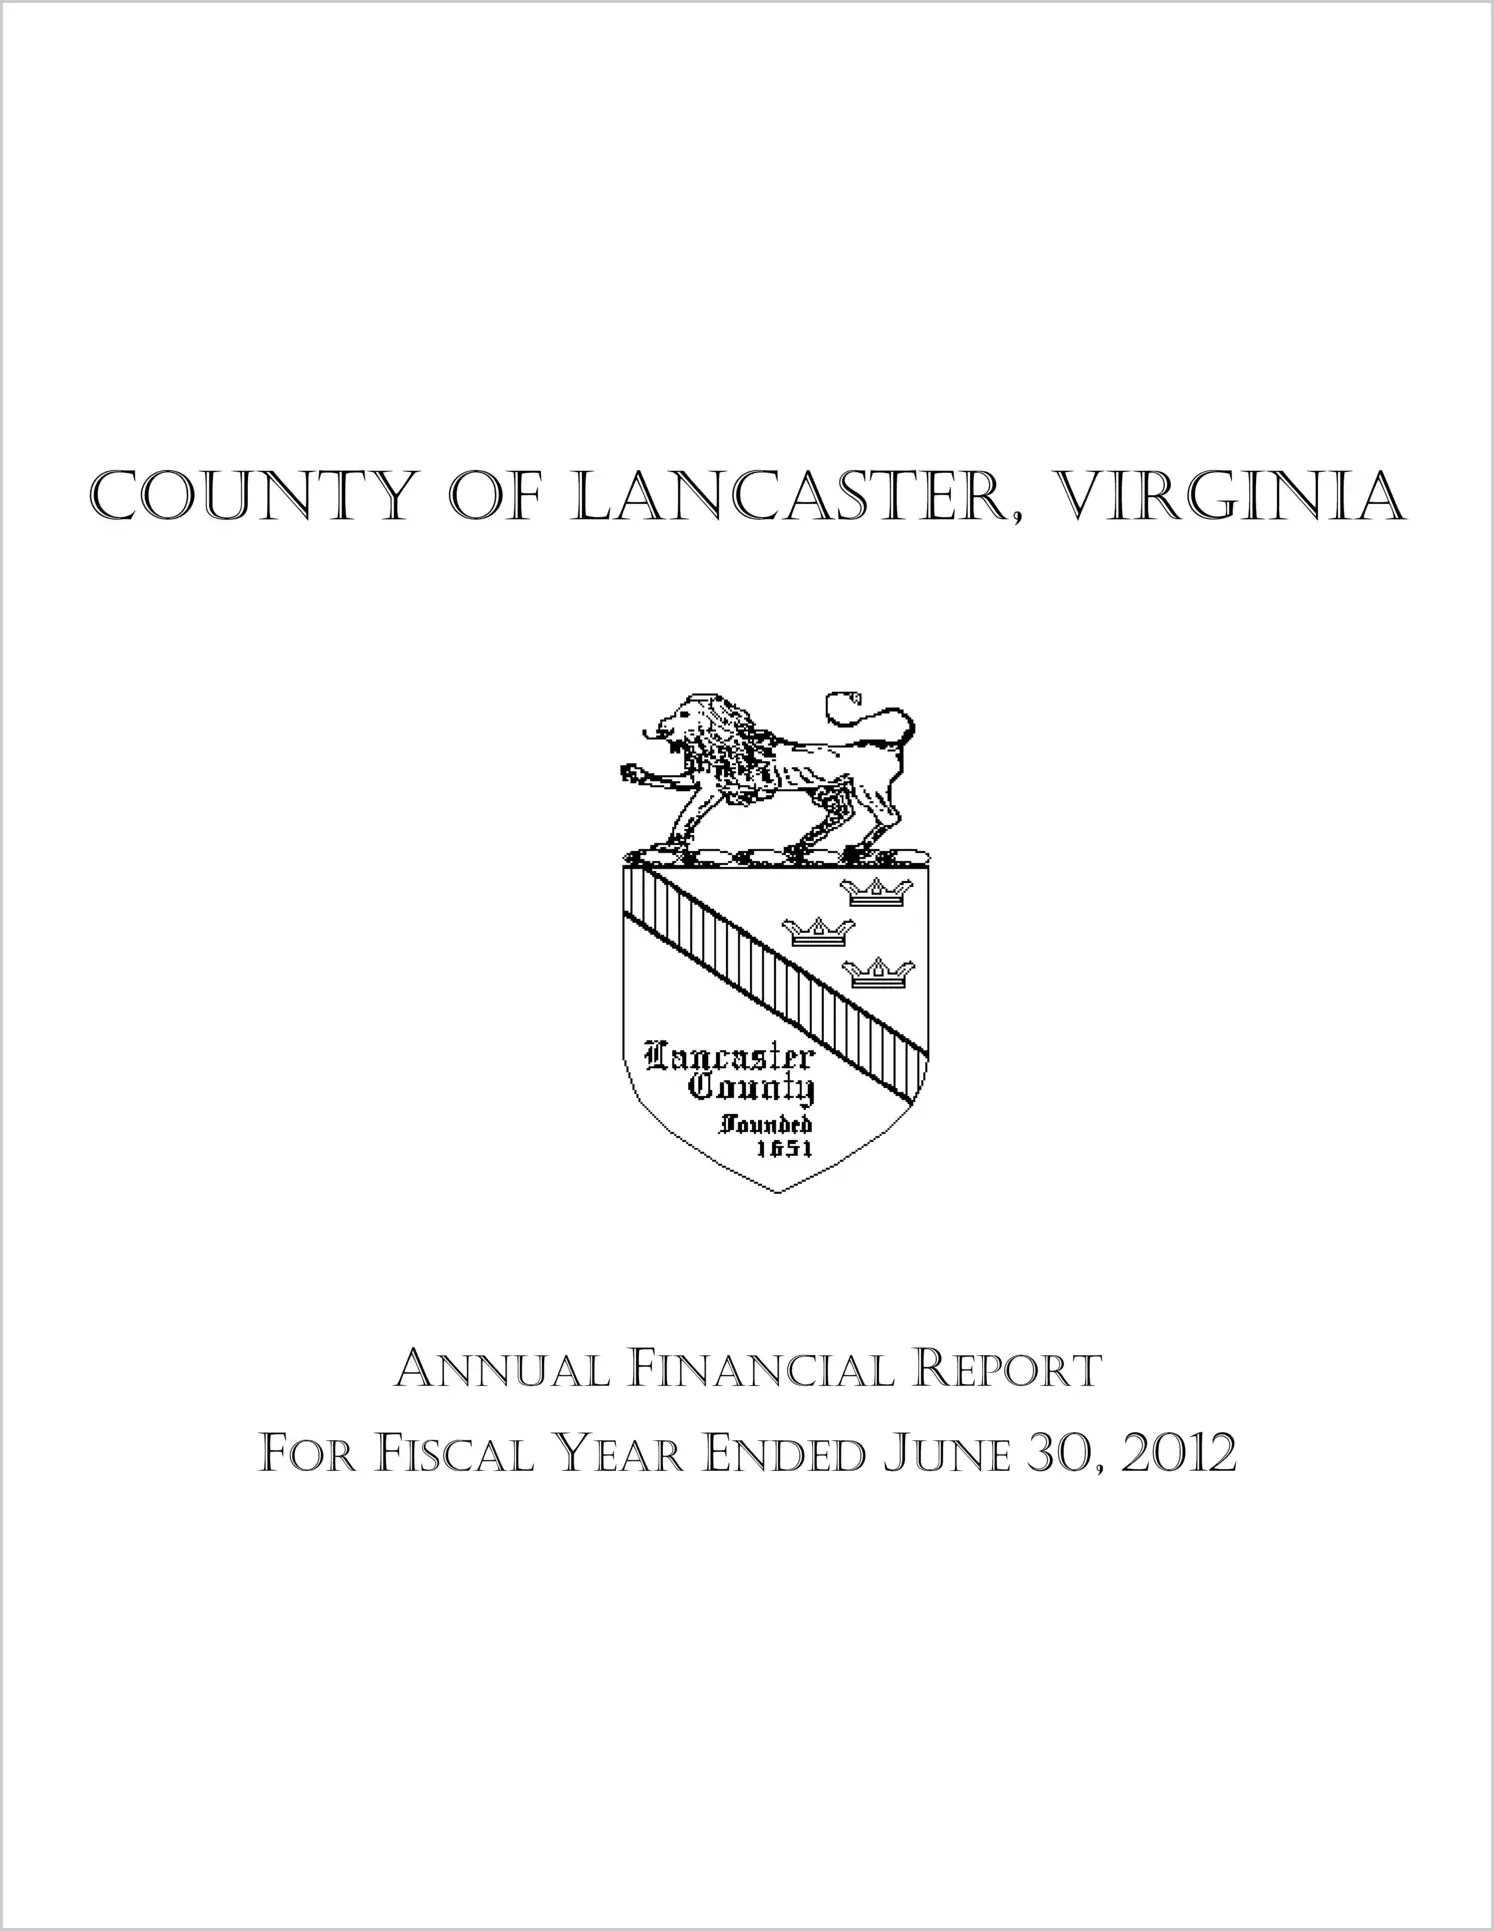 2012 Annual Financial Report for County of Lancaster